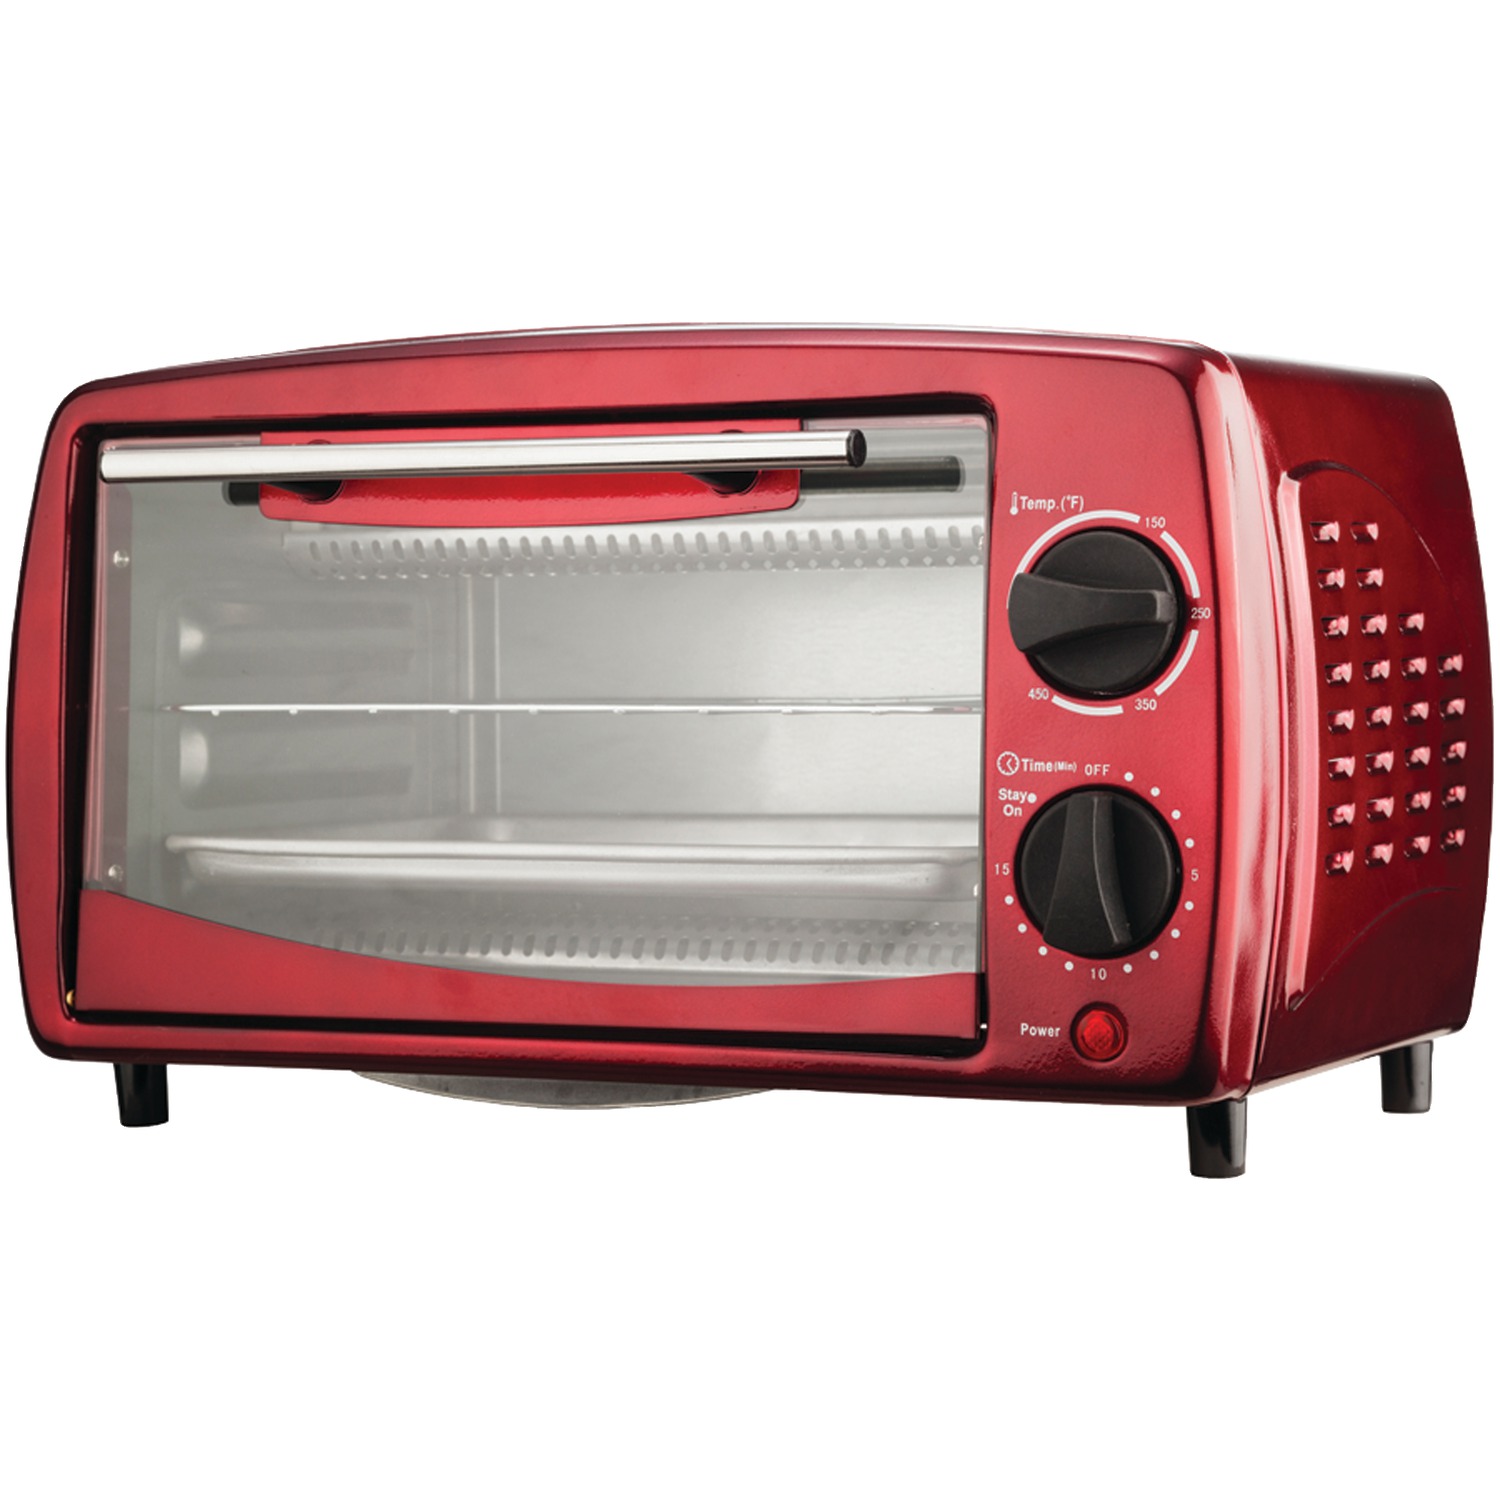 Brentwood Appliances TS-345R Stainless Steel 4 Slice Toaster Oven, Ruby Red - image 1 of 5